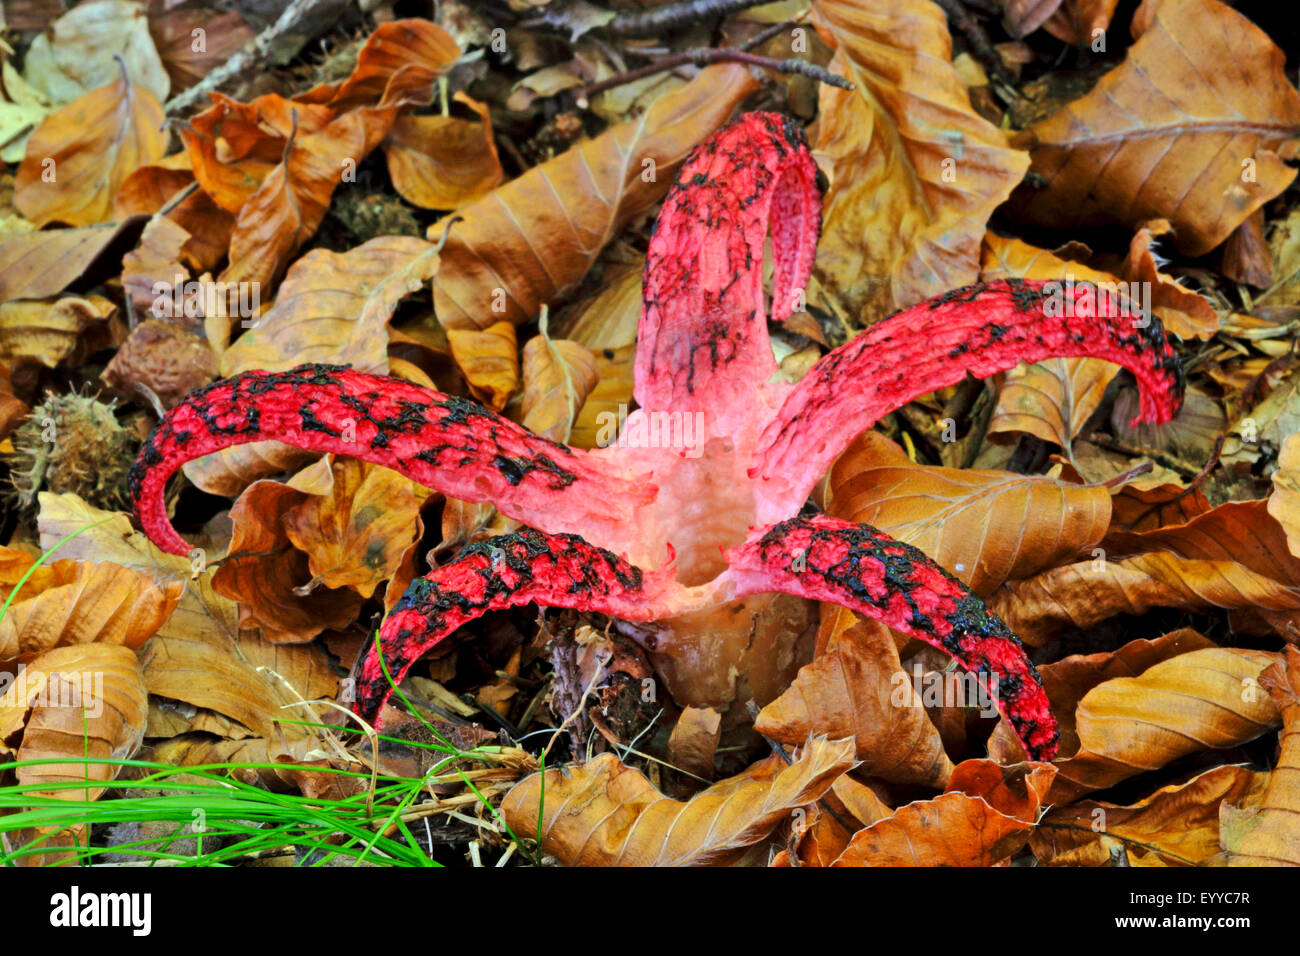 Devil's fingers, Devil's claw fungus, Giant stink horn, Octopus stinkhorn (Anthurus archeri, Clathrus archeri), fruiting body on forest ground, view from above, Germany Stock Photo